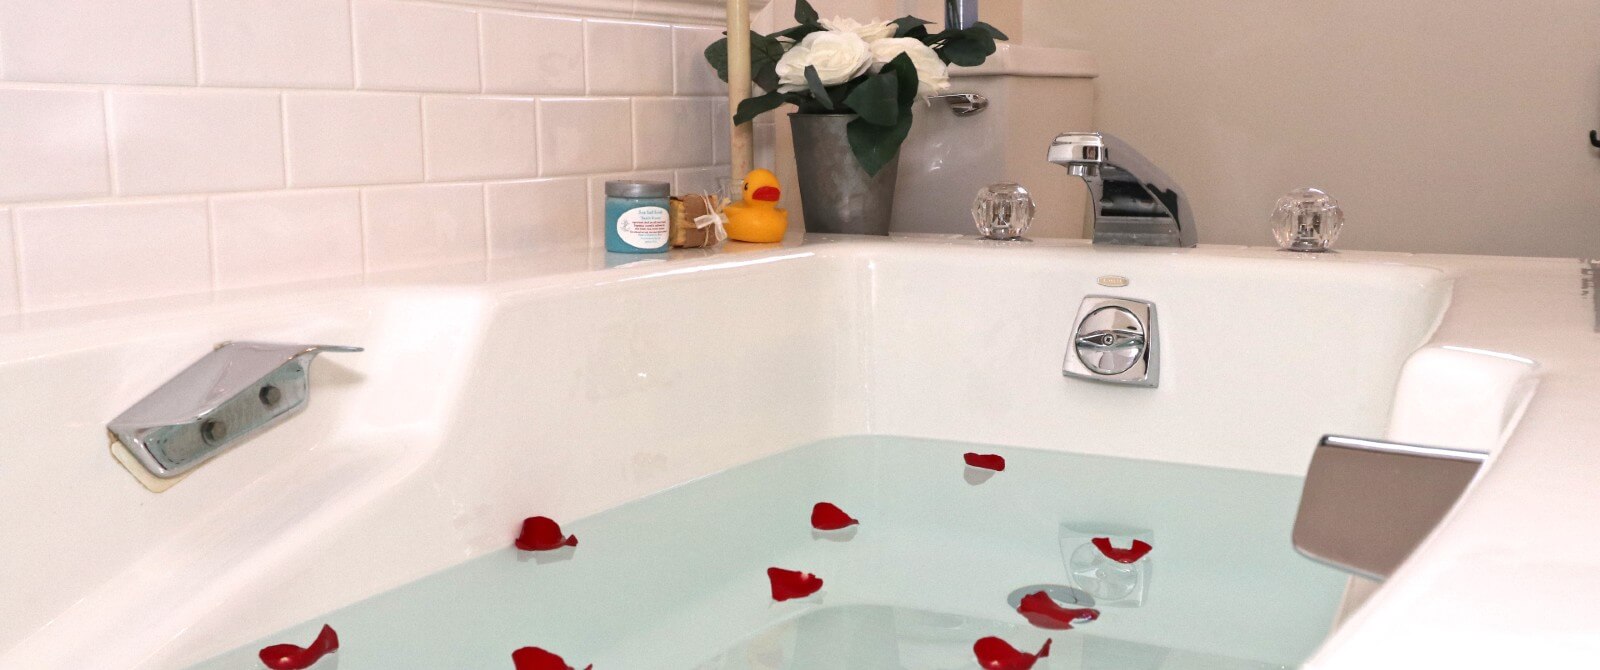 Large jacuzzi tub with red rose petals in the water